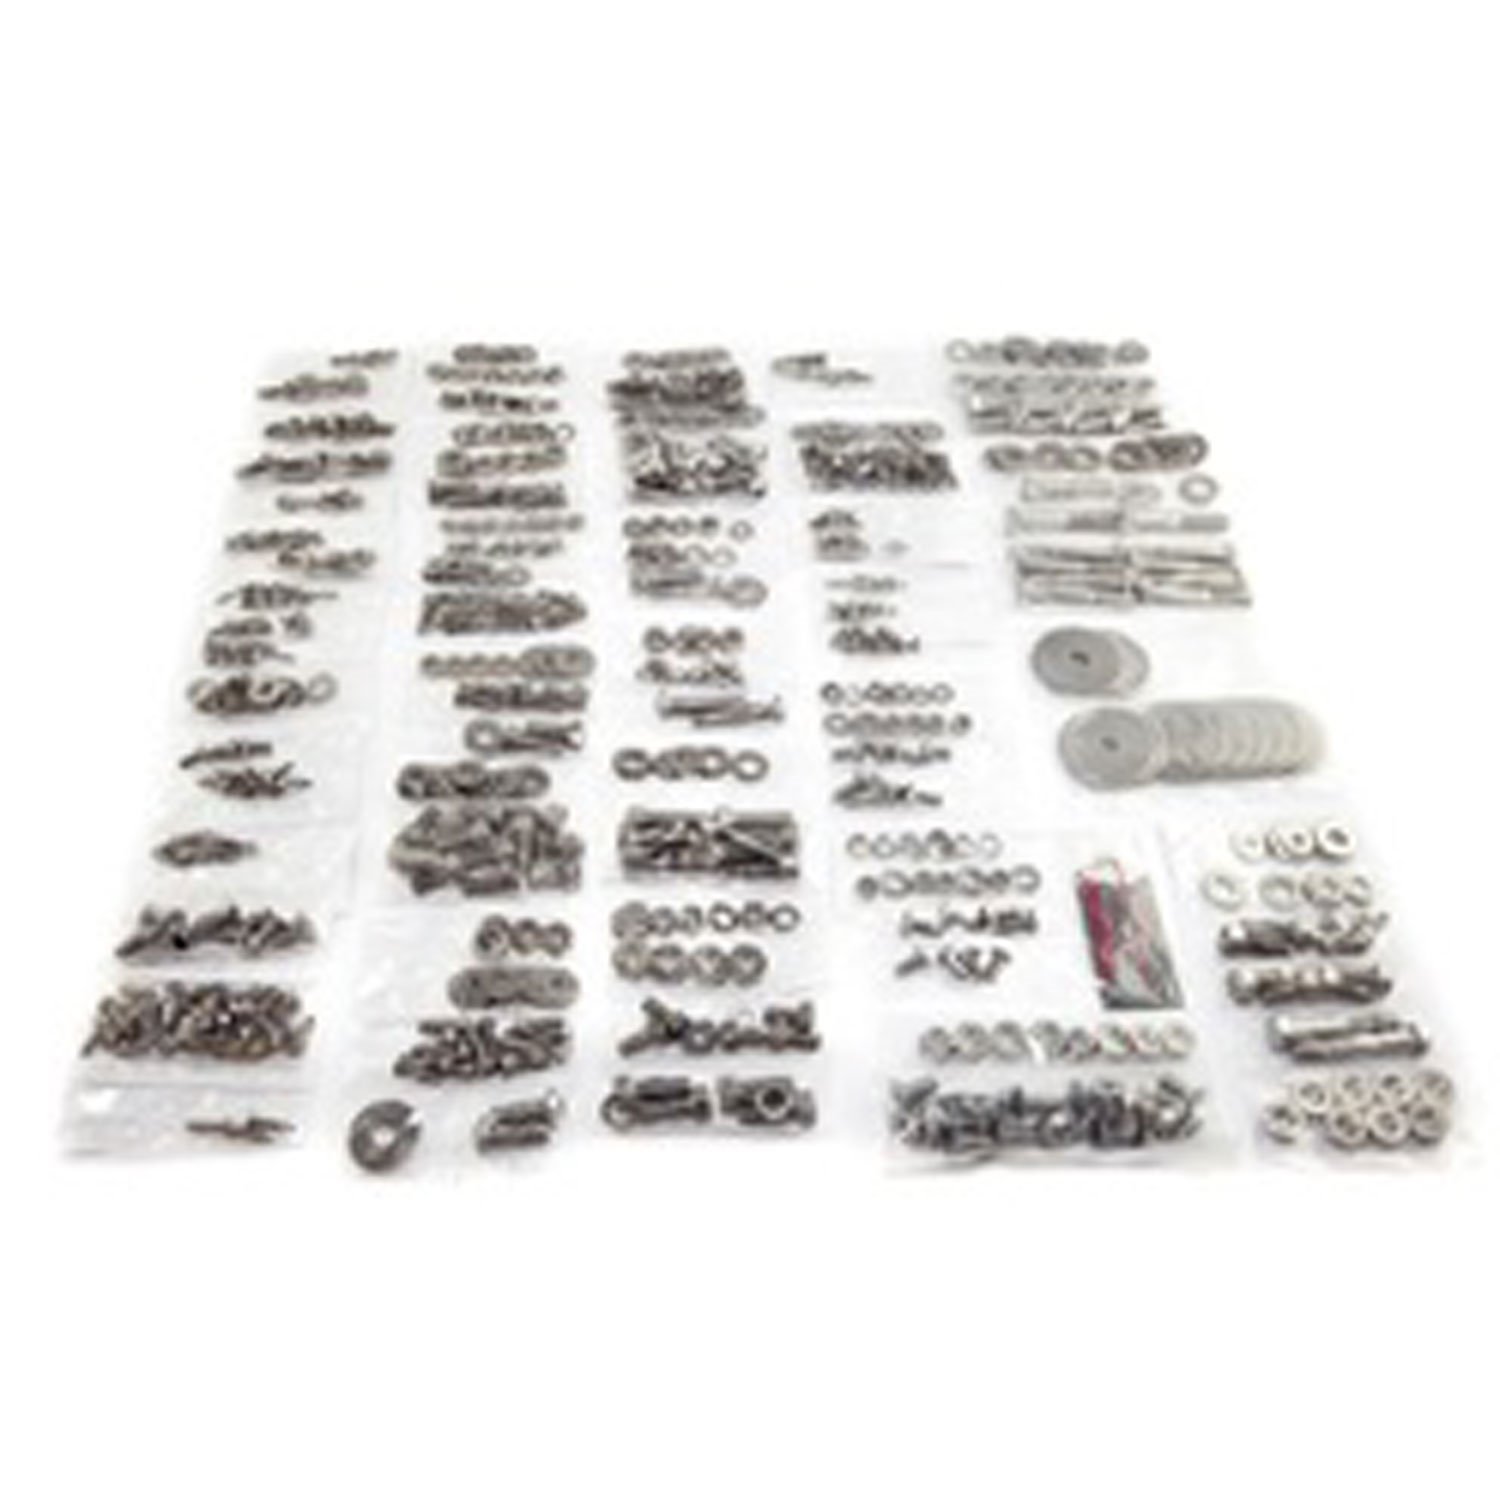 This 539 piece stainless steel body fastener kit gives you all the necessary fasteners to rebuild a